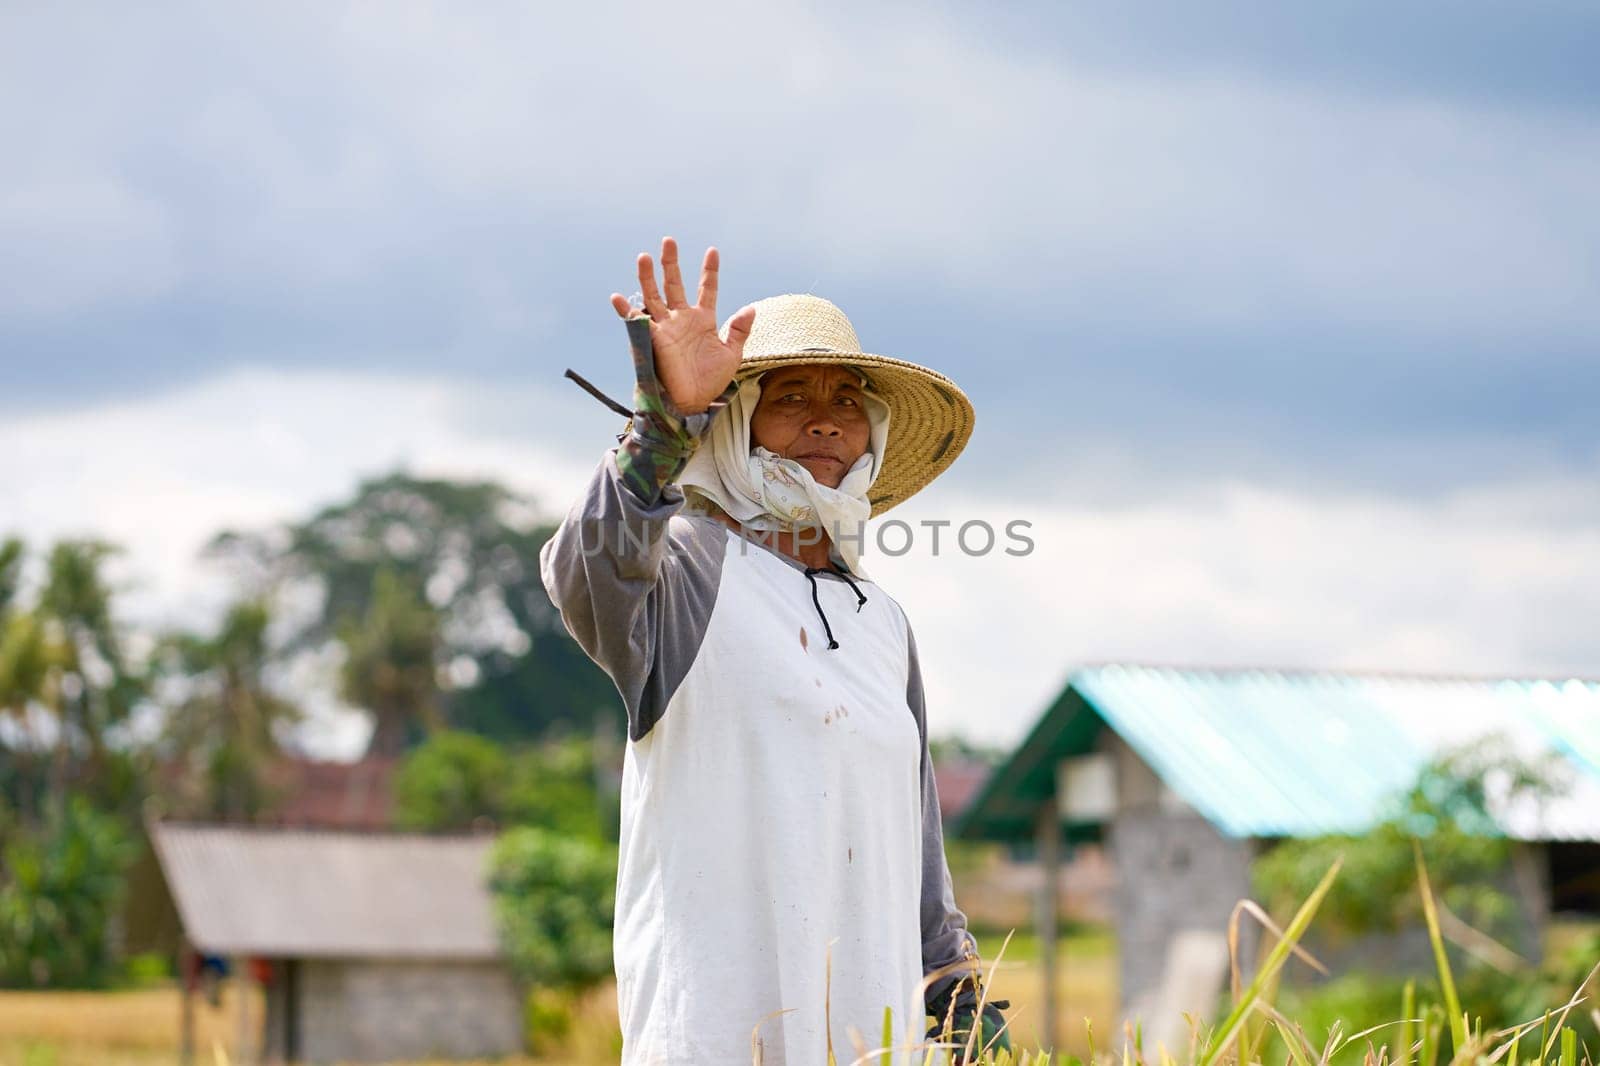 Emotional portrait of an Asian farmer wearing a straw hat and holding a sickle knife and cutting rice stalks in the field on a hot day. by Try_my_best